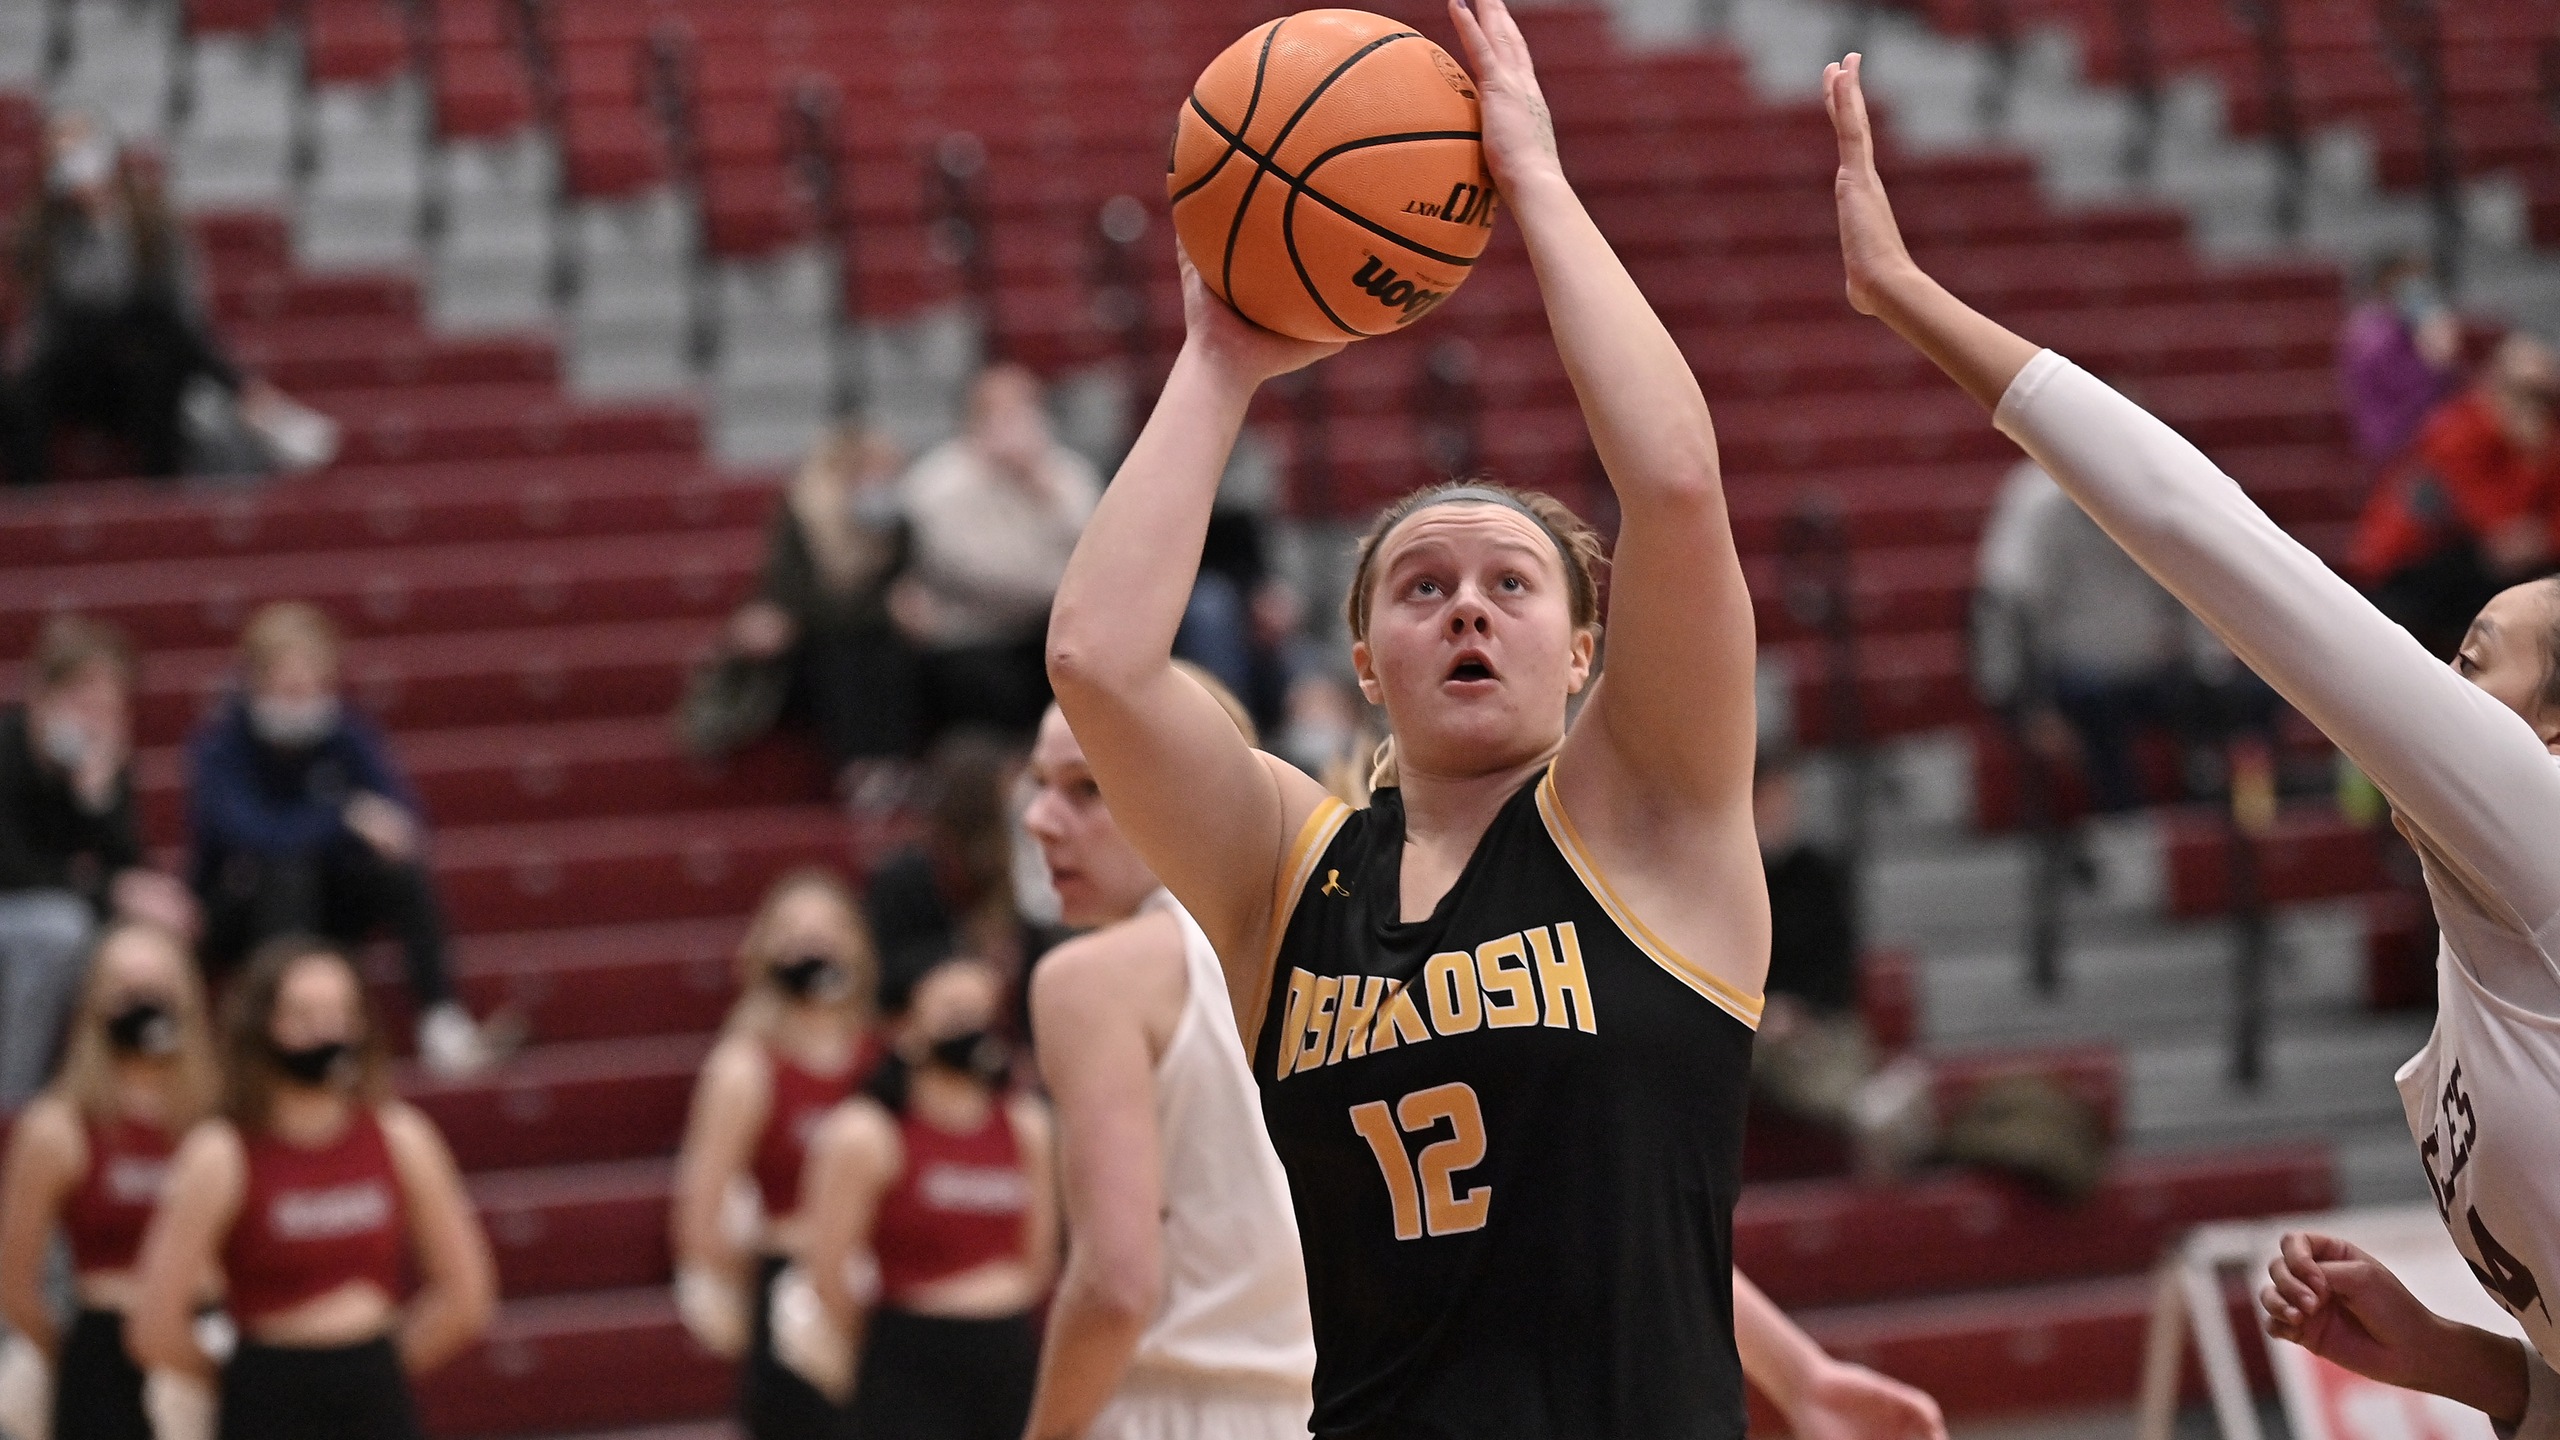 Leah Porath scored a game-high 17 points, including UW-Oshkosh's final six during the second overtime session.